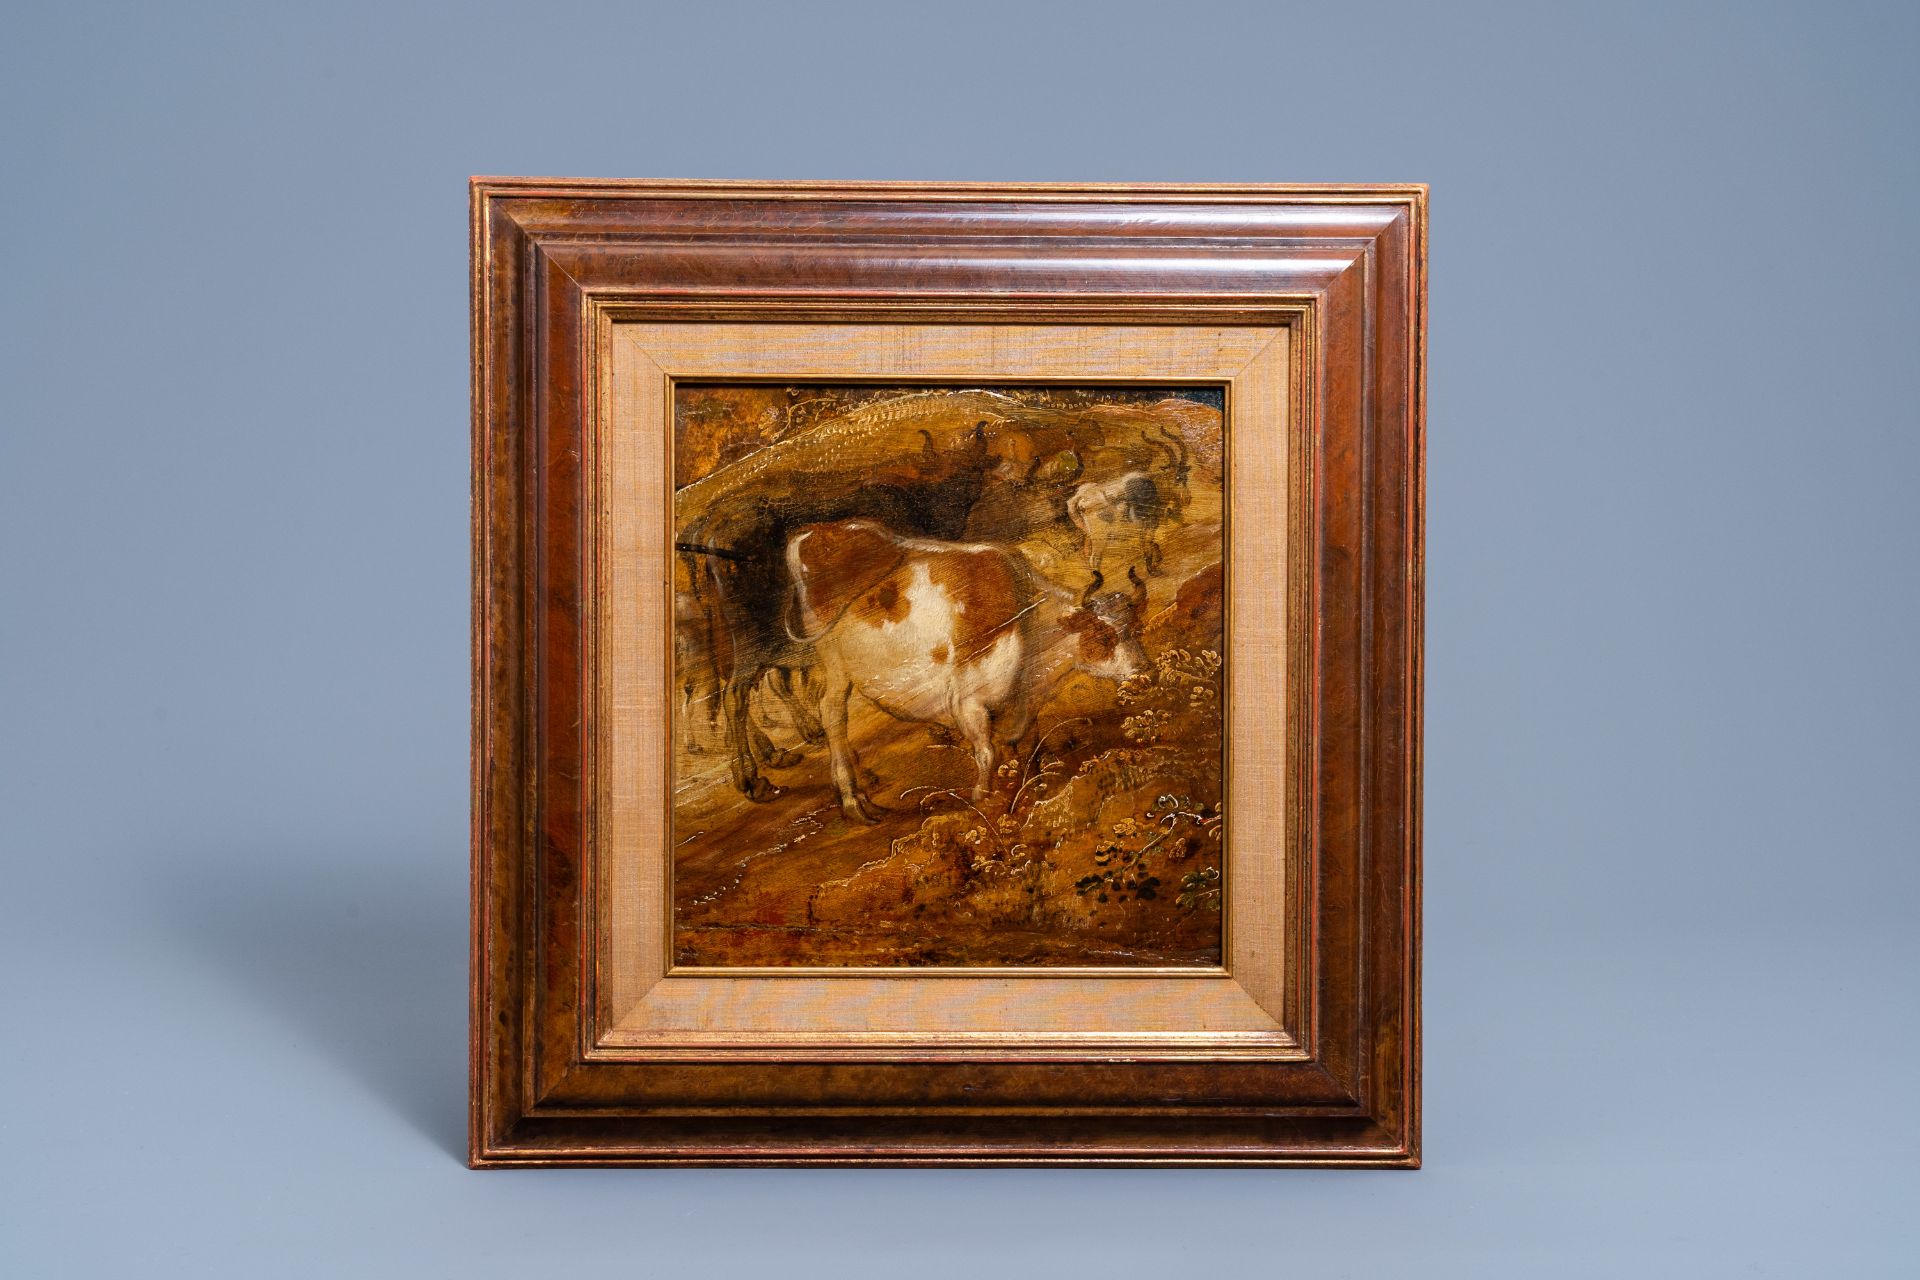 Flemish school, follower of Roelant Savery (1576-1639): Cattle in a landscape, oil on panel, 17th C. - Image 2 of 3